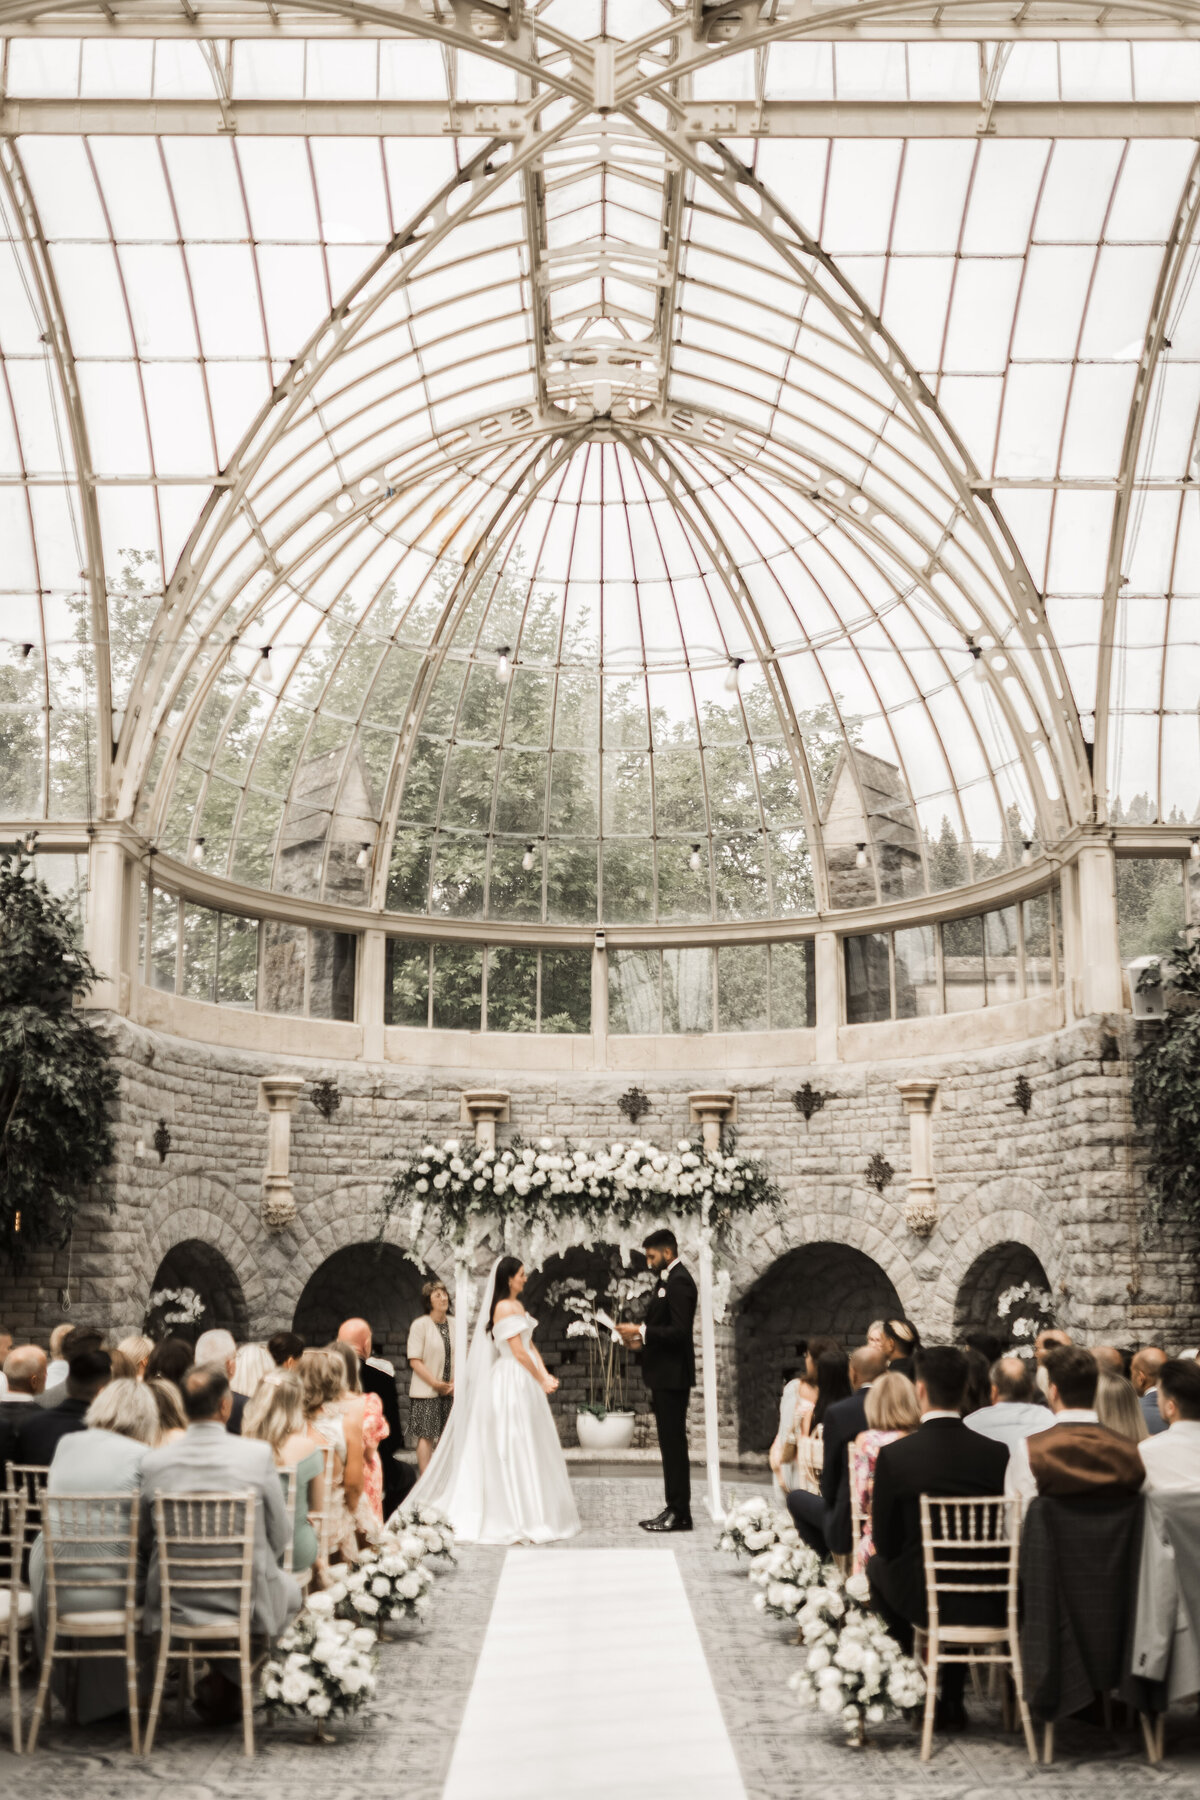 Wedding ceremony in the Orangery at Tortworth Court, Cotswold wedding venue